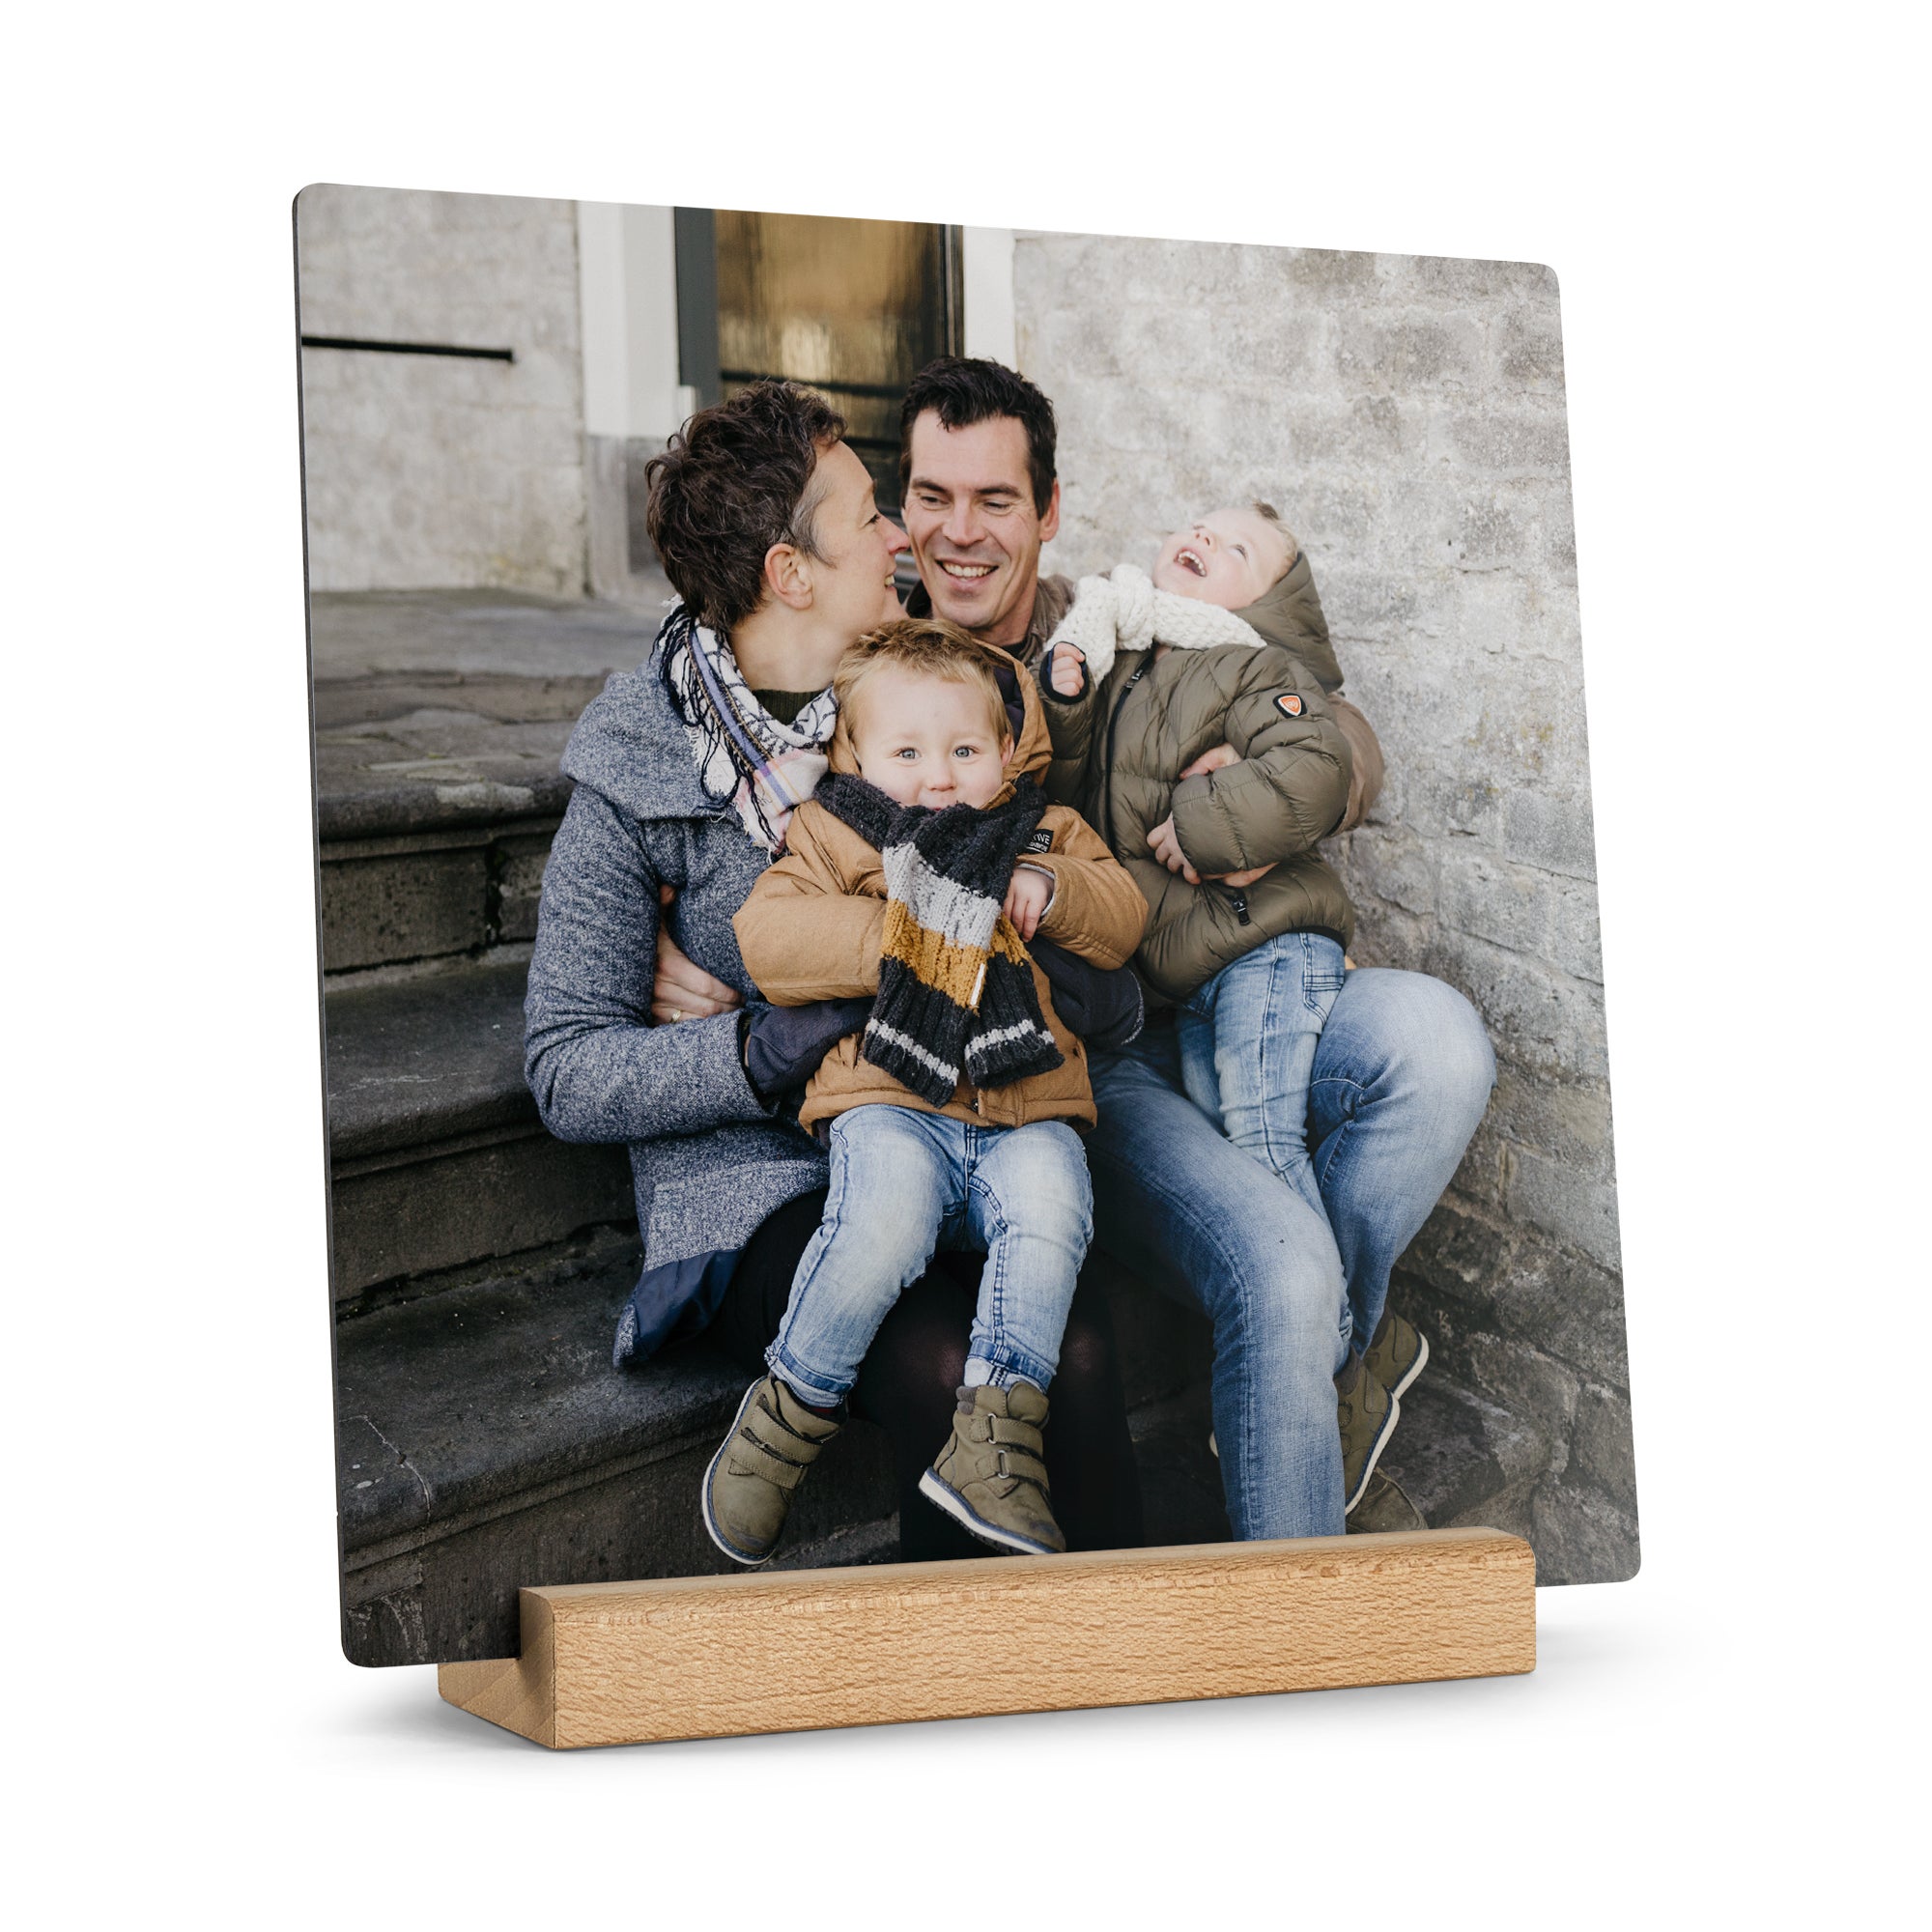 Printed Wooden Photo Tile with Stand - Square